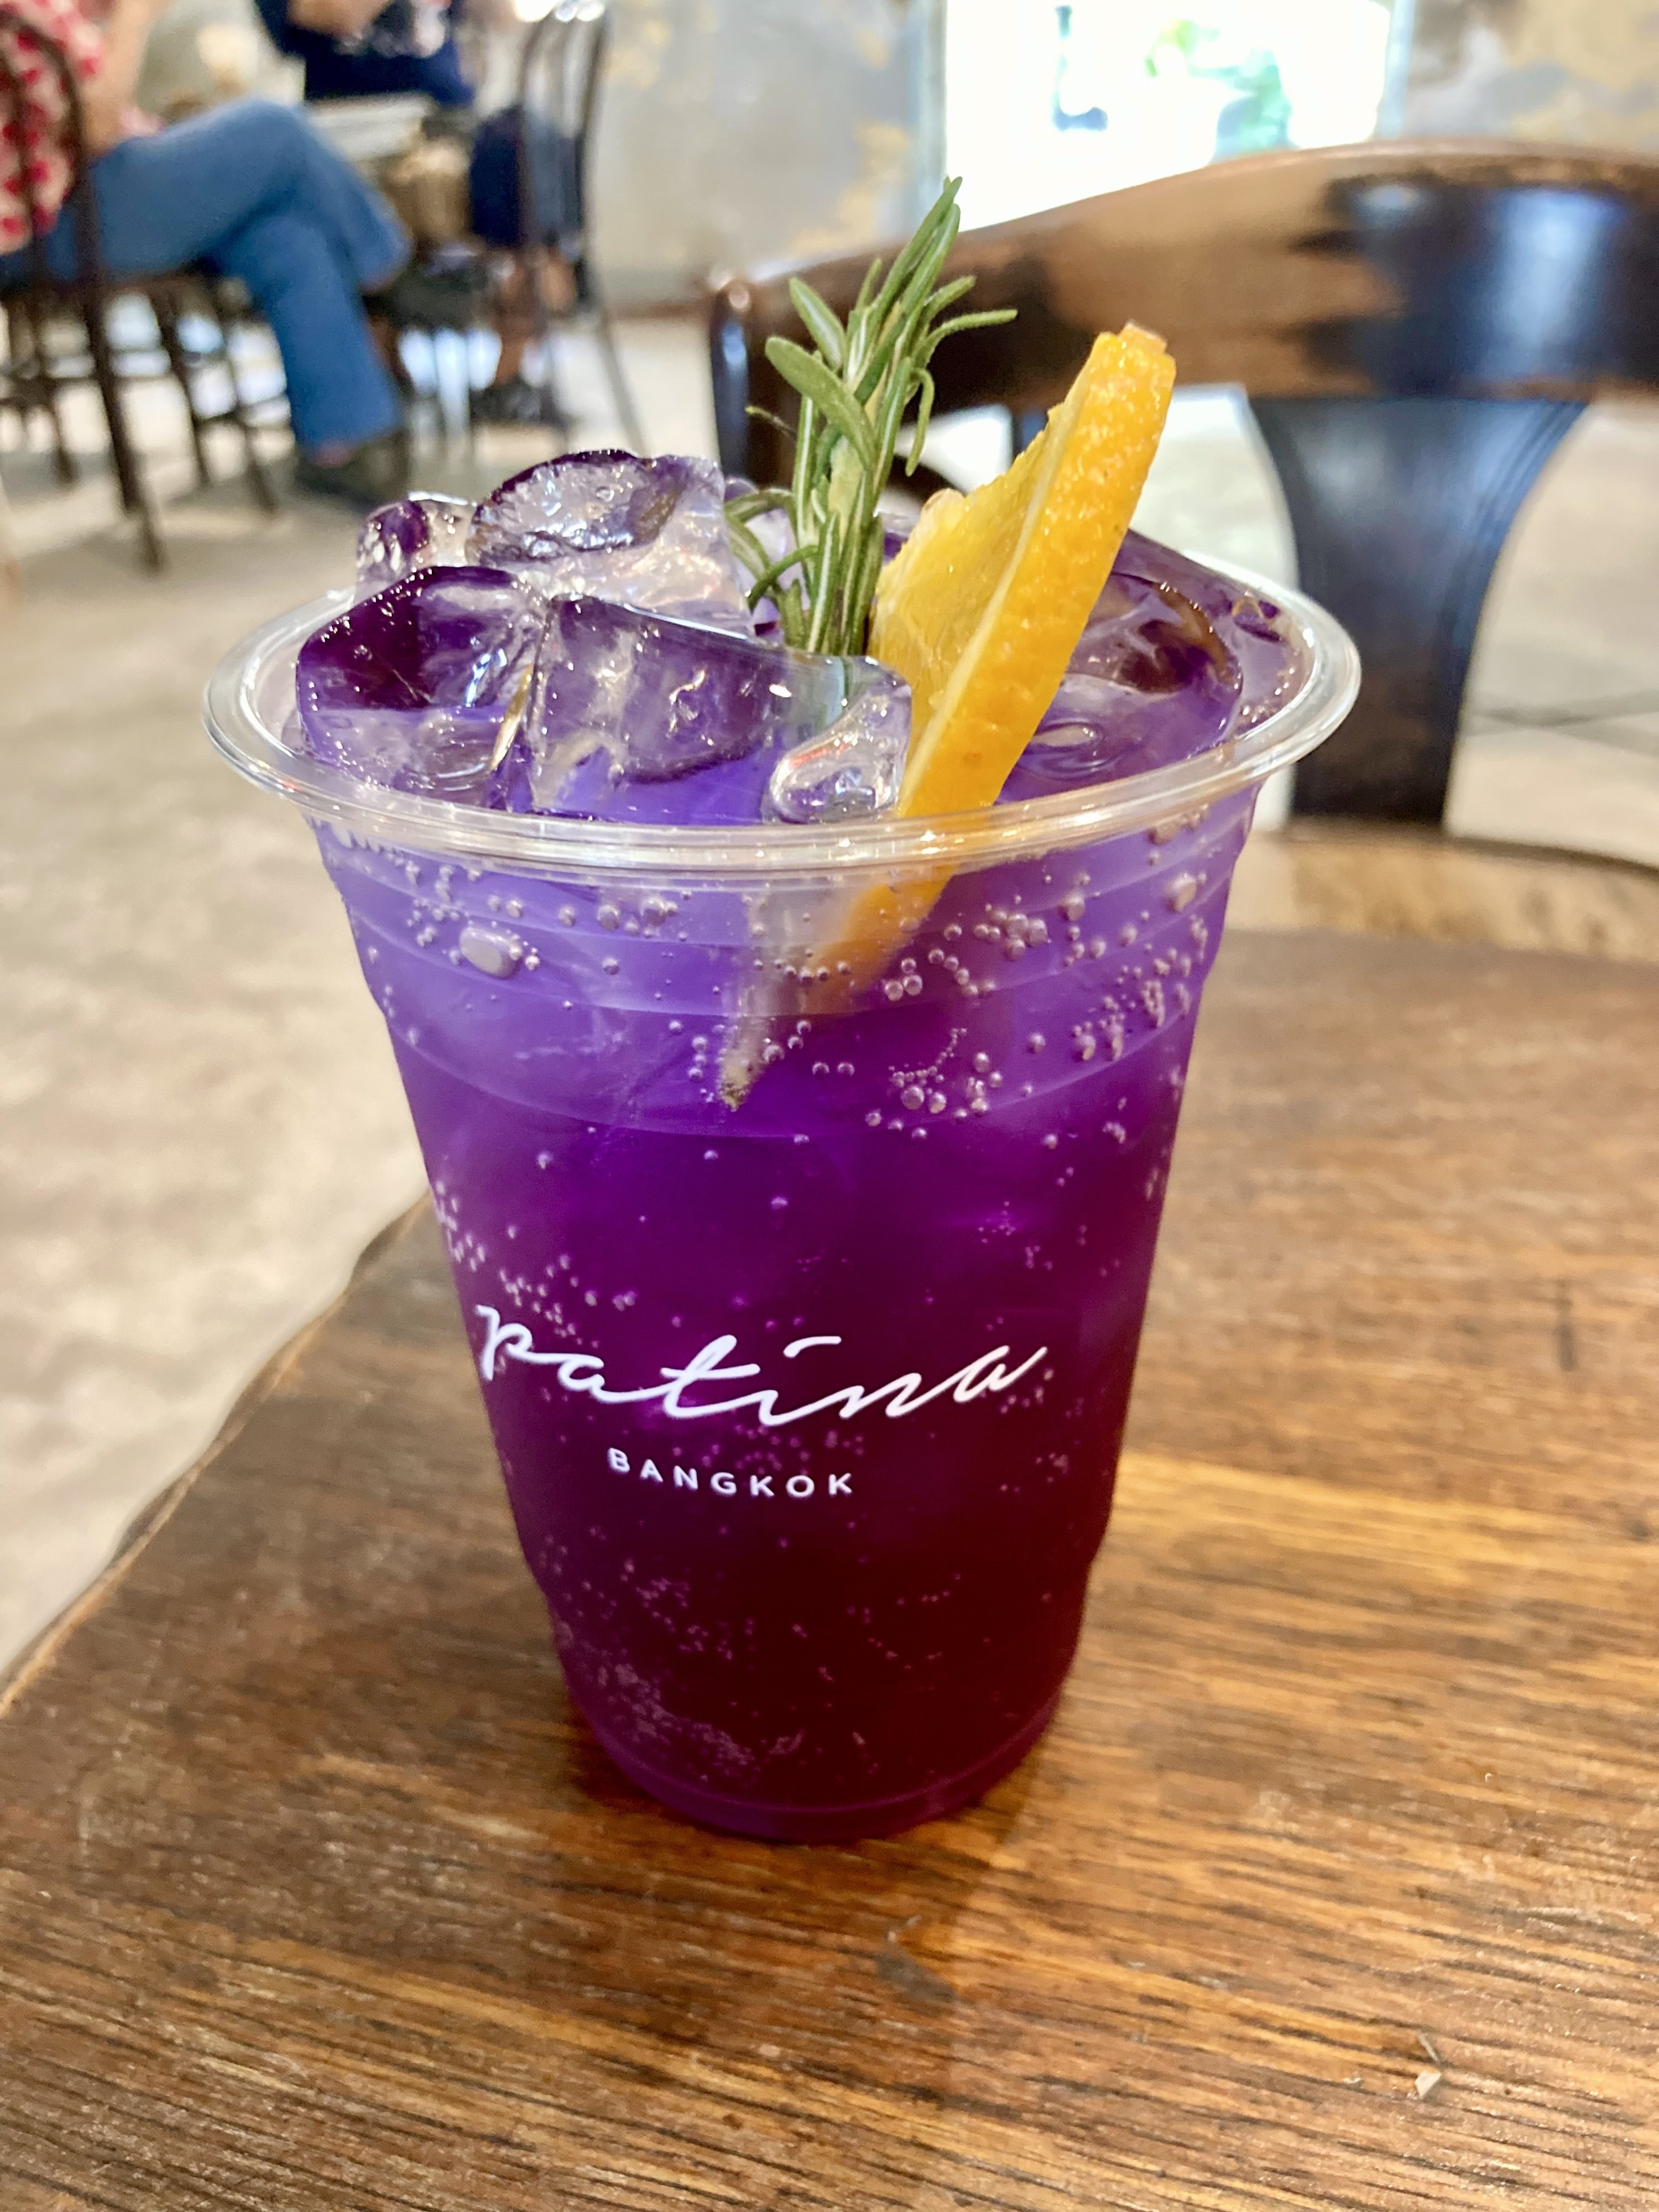 The Butterfly Pea Soda glows in seductive shades of purple-blue and is made from the flowers of the 'Clitoria ternatea' plant (butterfly pea), June 14, 2022. (DPA Photo)